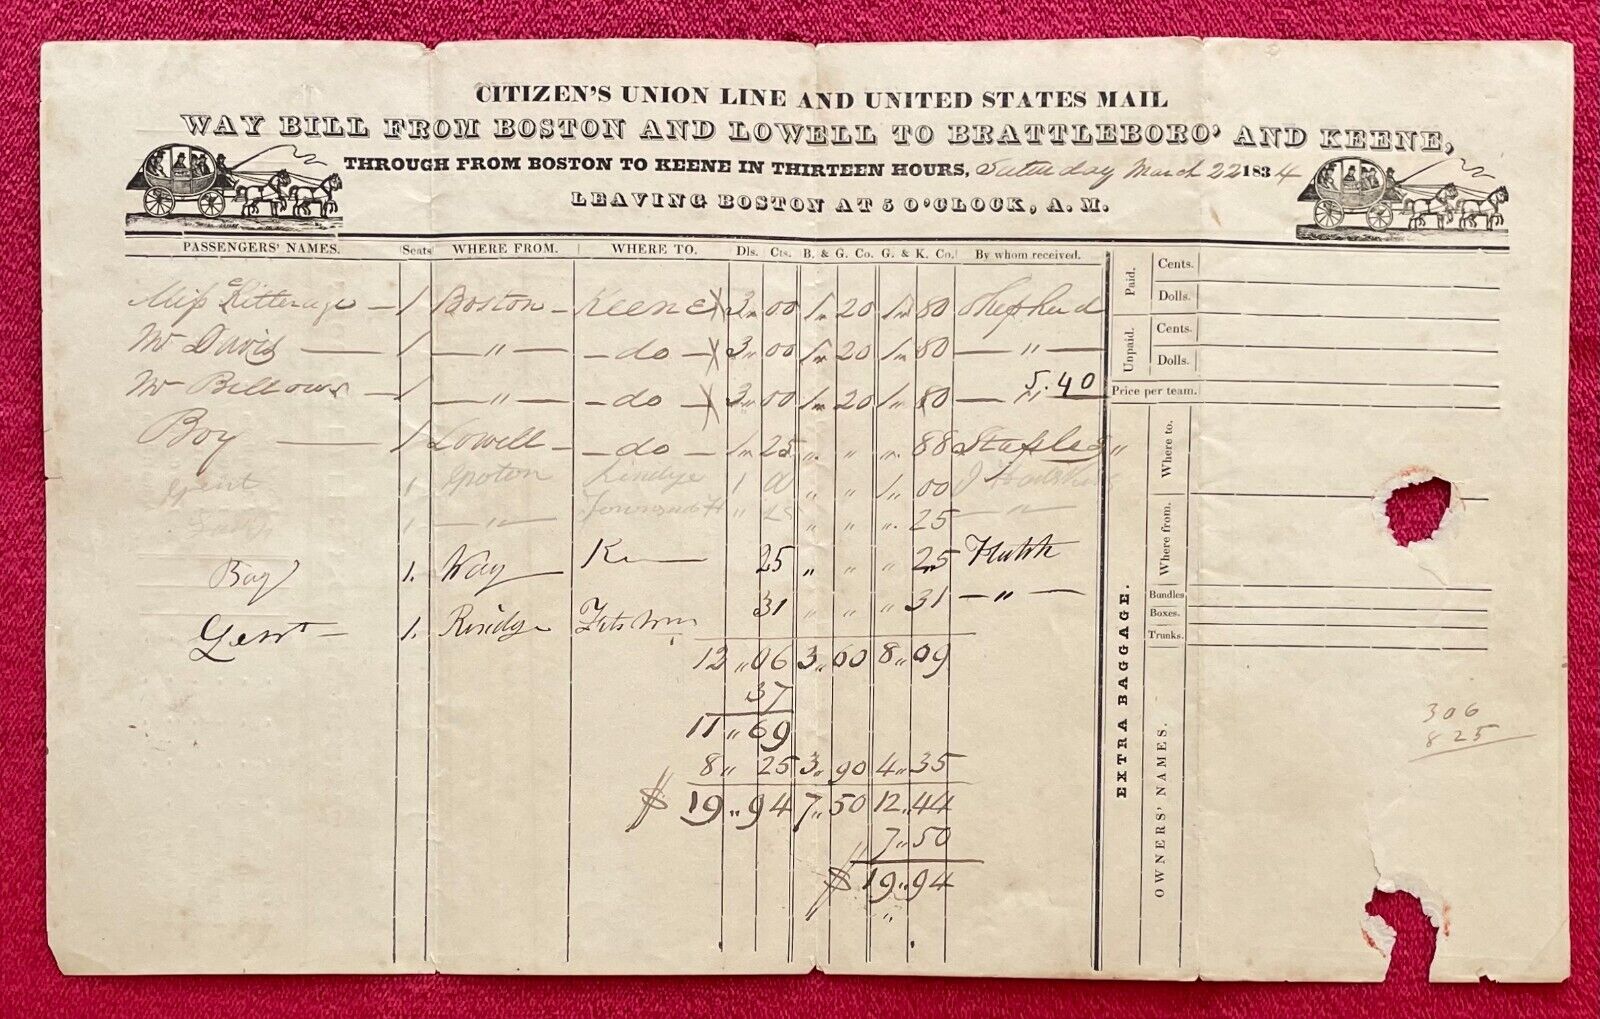 CITIZENS UNION LINE AND UNITED STATES MAIL 1834 WAYBILL - LIST OF PASSENGERS